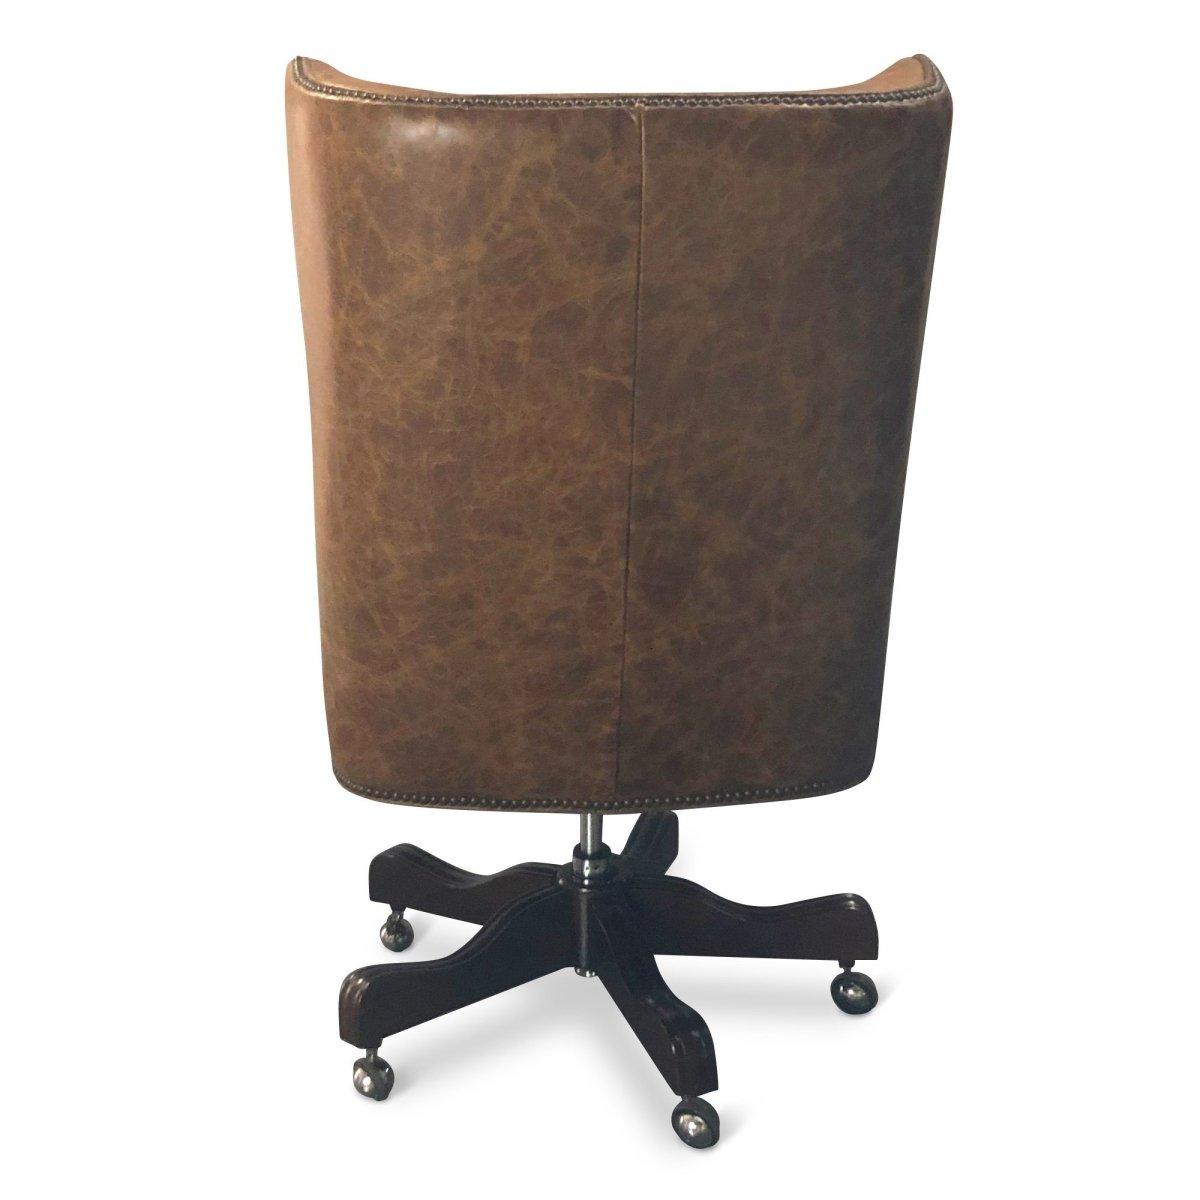 https://knoxdeco.com/cdn/shop/products/tufted-brown-leather-adjustable-executive-office-chair-casters-rustic-deco-721778.jpg?v=1648701811